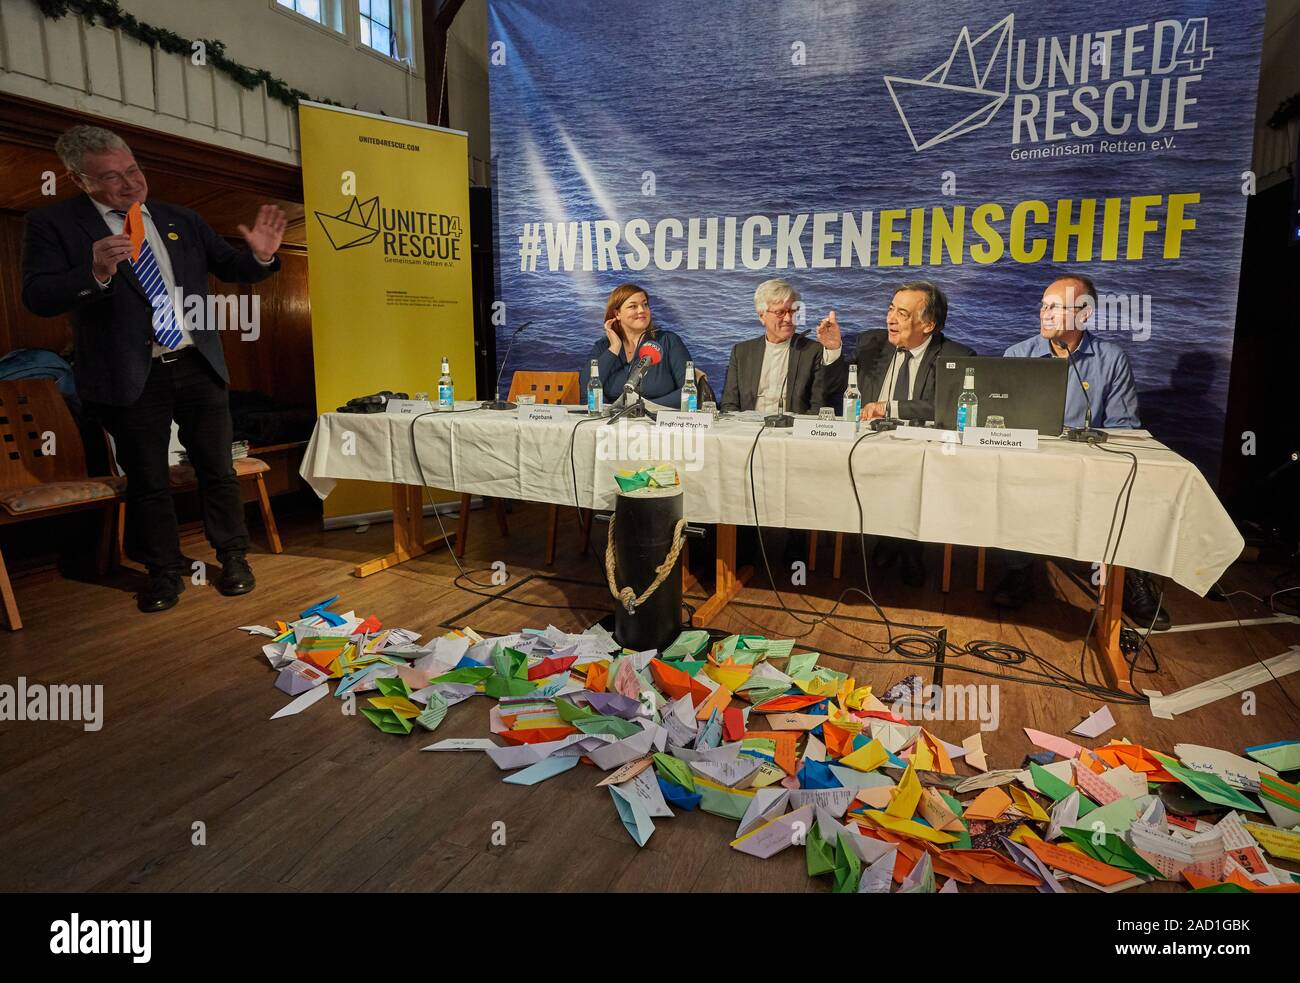 Hamburg, Germany. 03rd Dec, 2019. Joachim Lenz (l-r), Speaker, Katharina Fegebank (Greens), Second Mayor of Hamburg, Heinrich Bedford-Strohm, President of the Council of the Evangelical Church in Germany, Leoluca Orlando, Mayor of Palermo, and Michael Schwickart, Sea-Watch, a sea rescue specialist, will give a press conference on the new alliance 'United4Rescue - Rescuing Together' at the River Ship Church. The civil society alliance of churches, municipalities and associations wants to send another ship to the Mediterranean Sea for rescue at sea. Credit: Georg Wendt/dpa/Alamy Live News Stock Photo